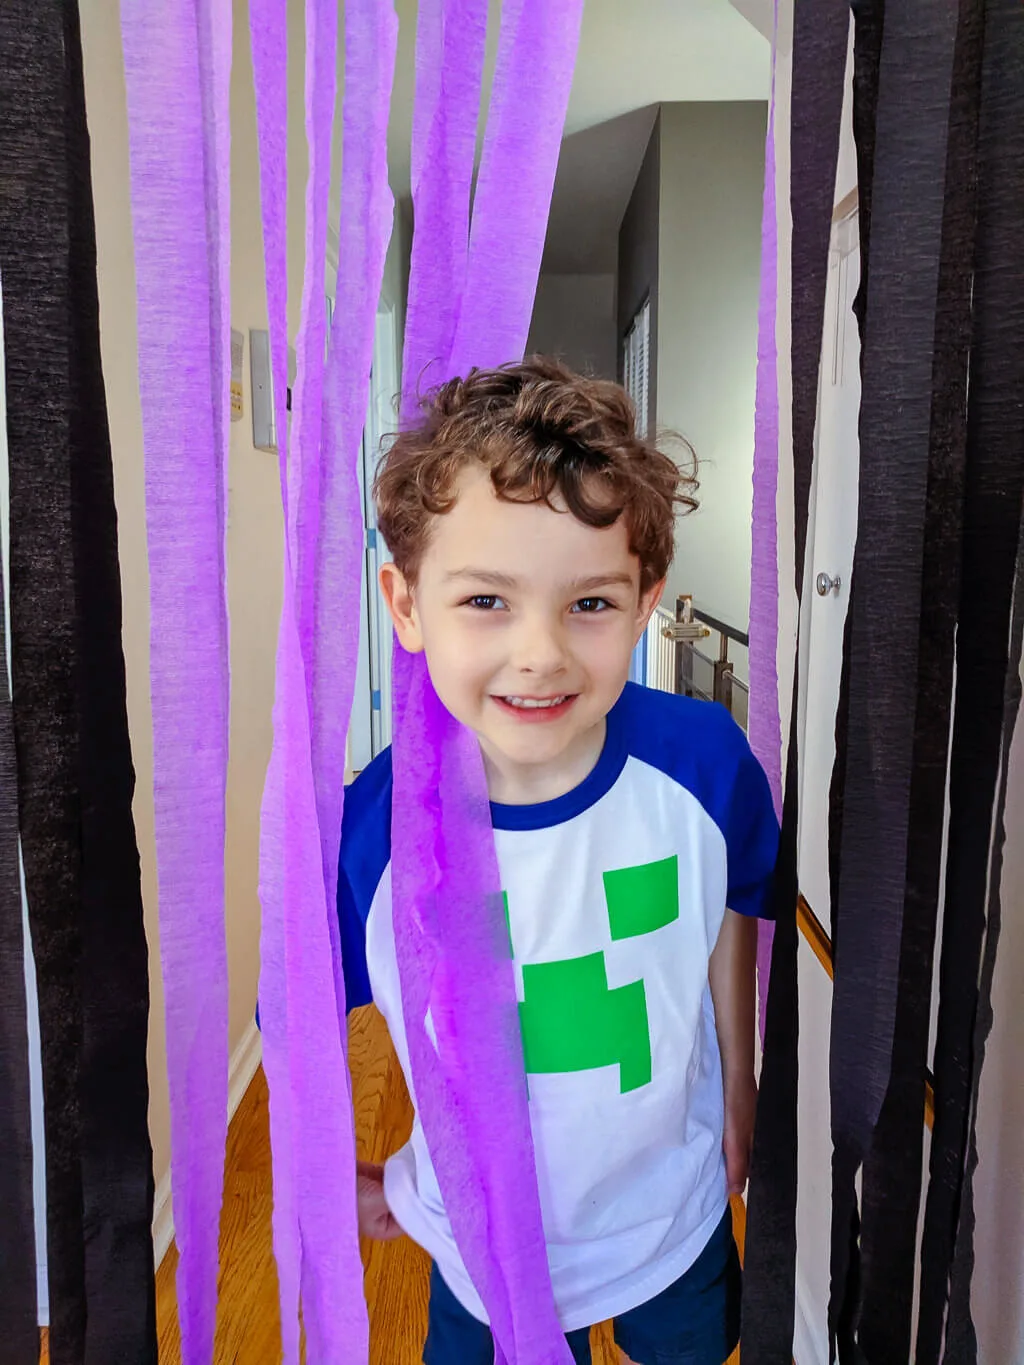 Minecraft birthday tshirt DIY and crepe paper nether portal- photo copyright Merriment Design Co.